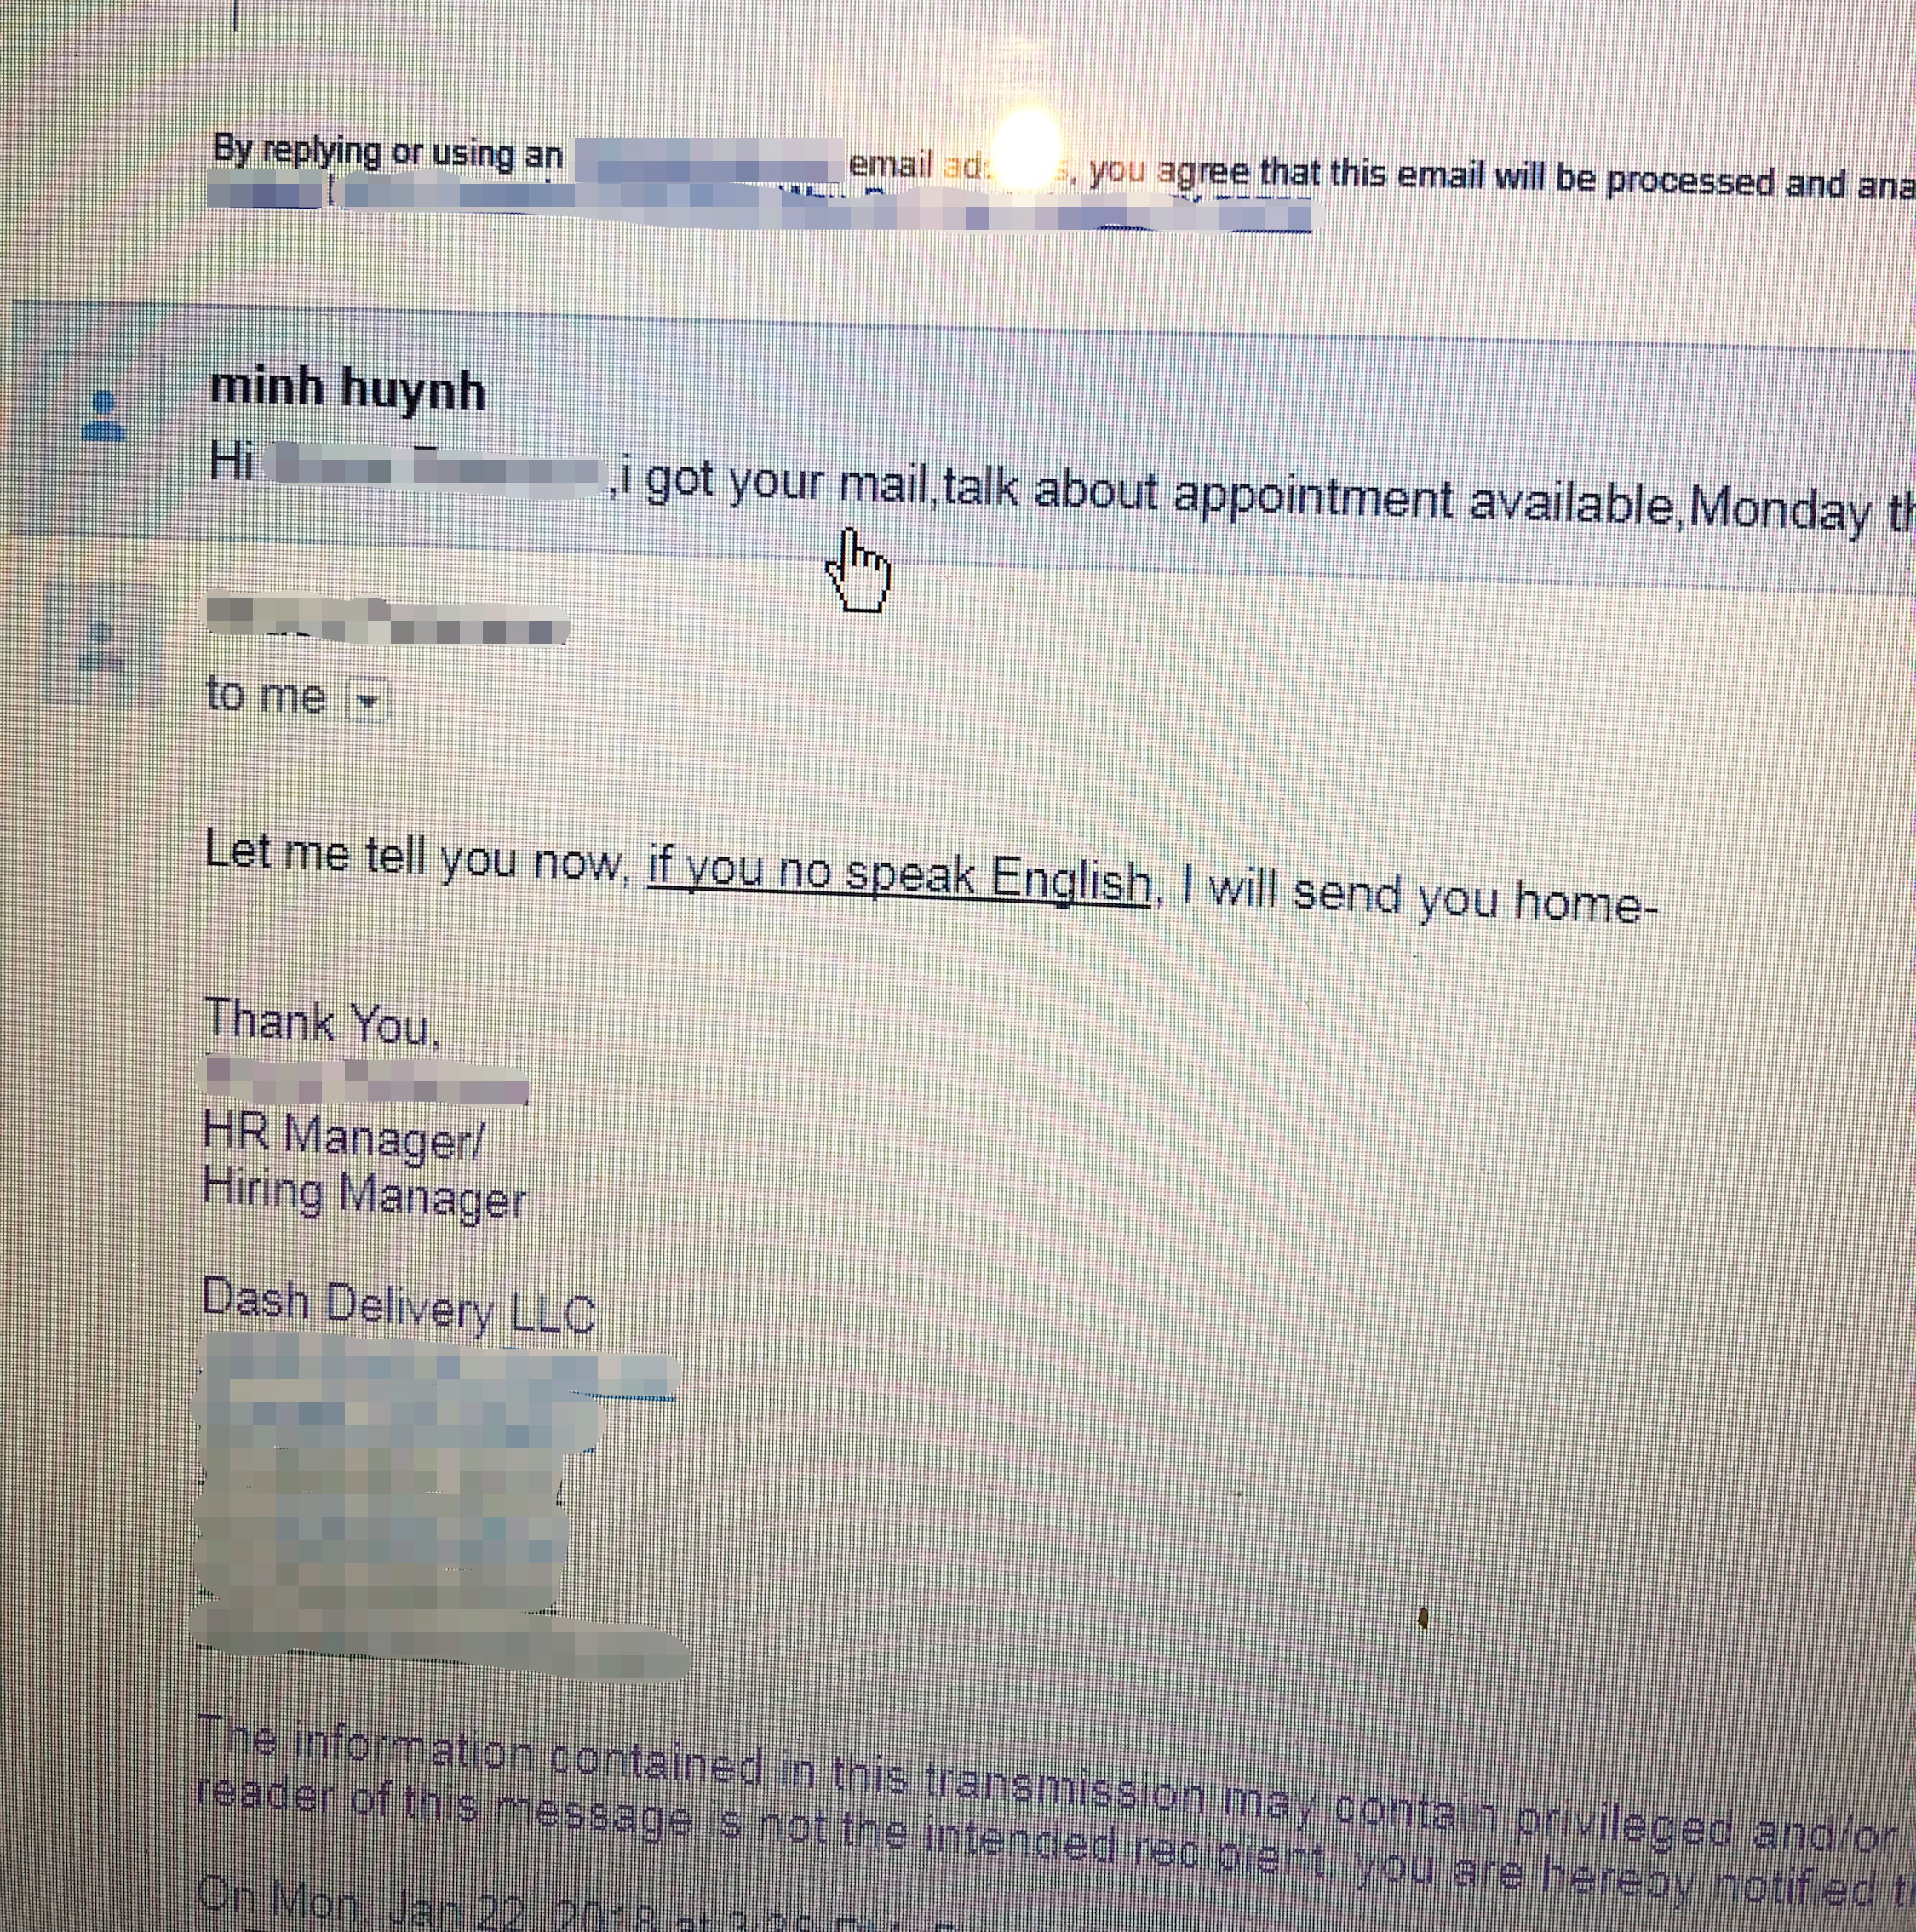 PHOTO: Emily Huynh saw this email that her father received from a hiring manager.